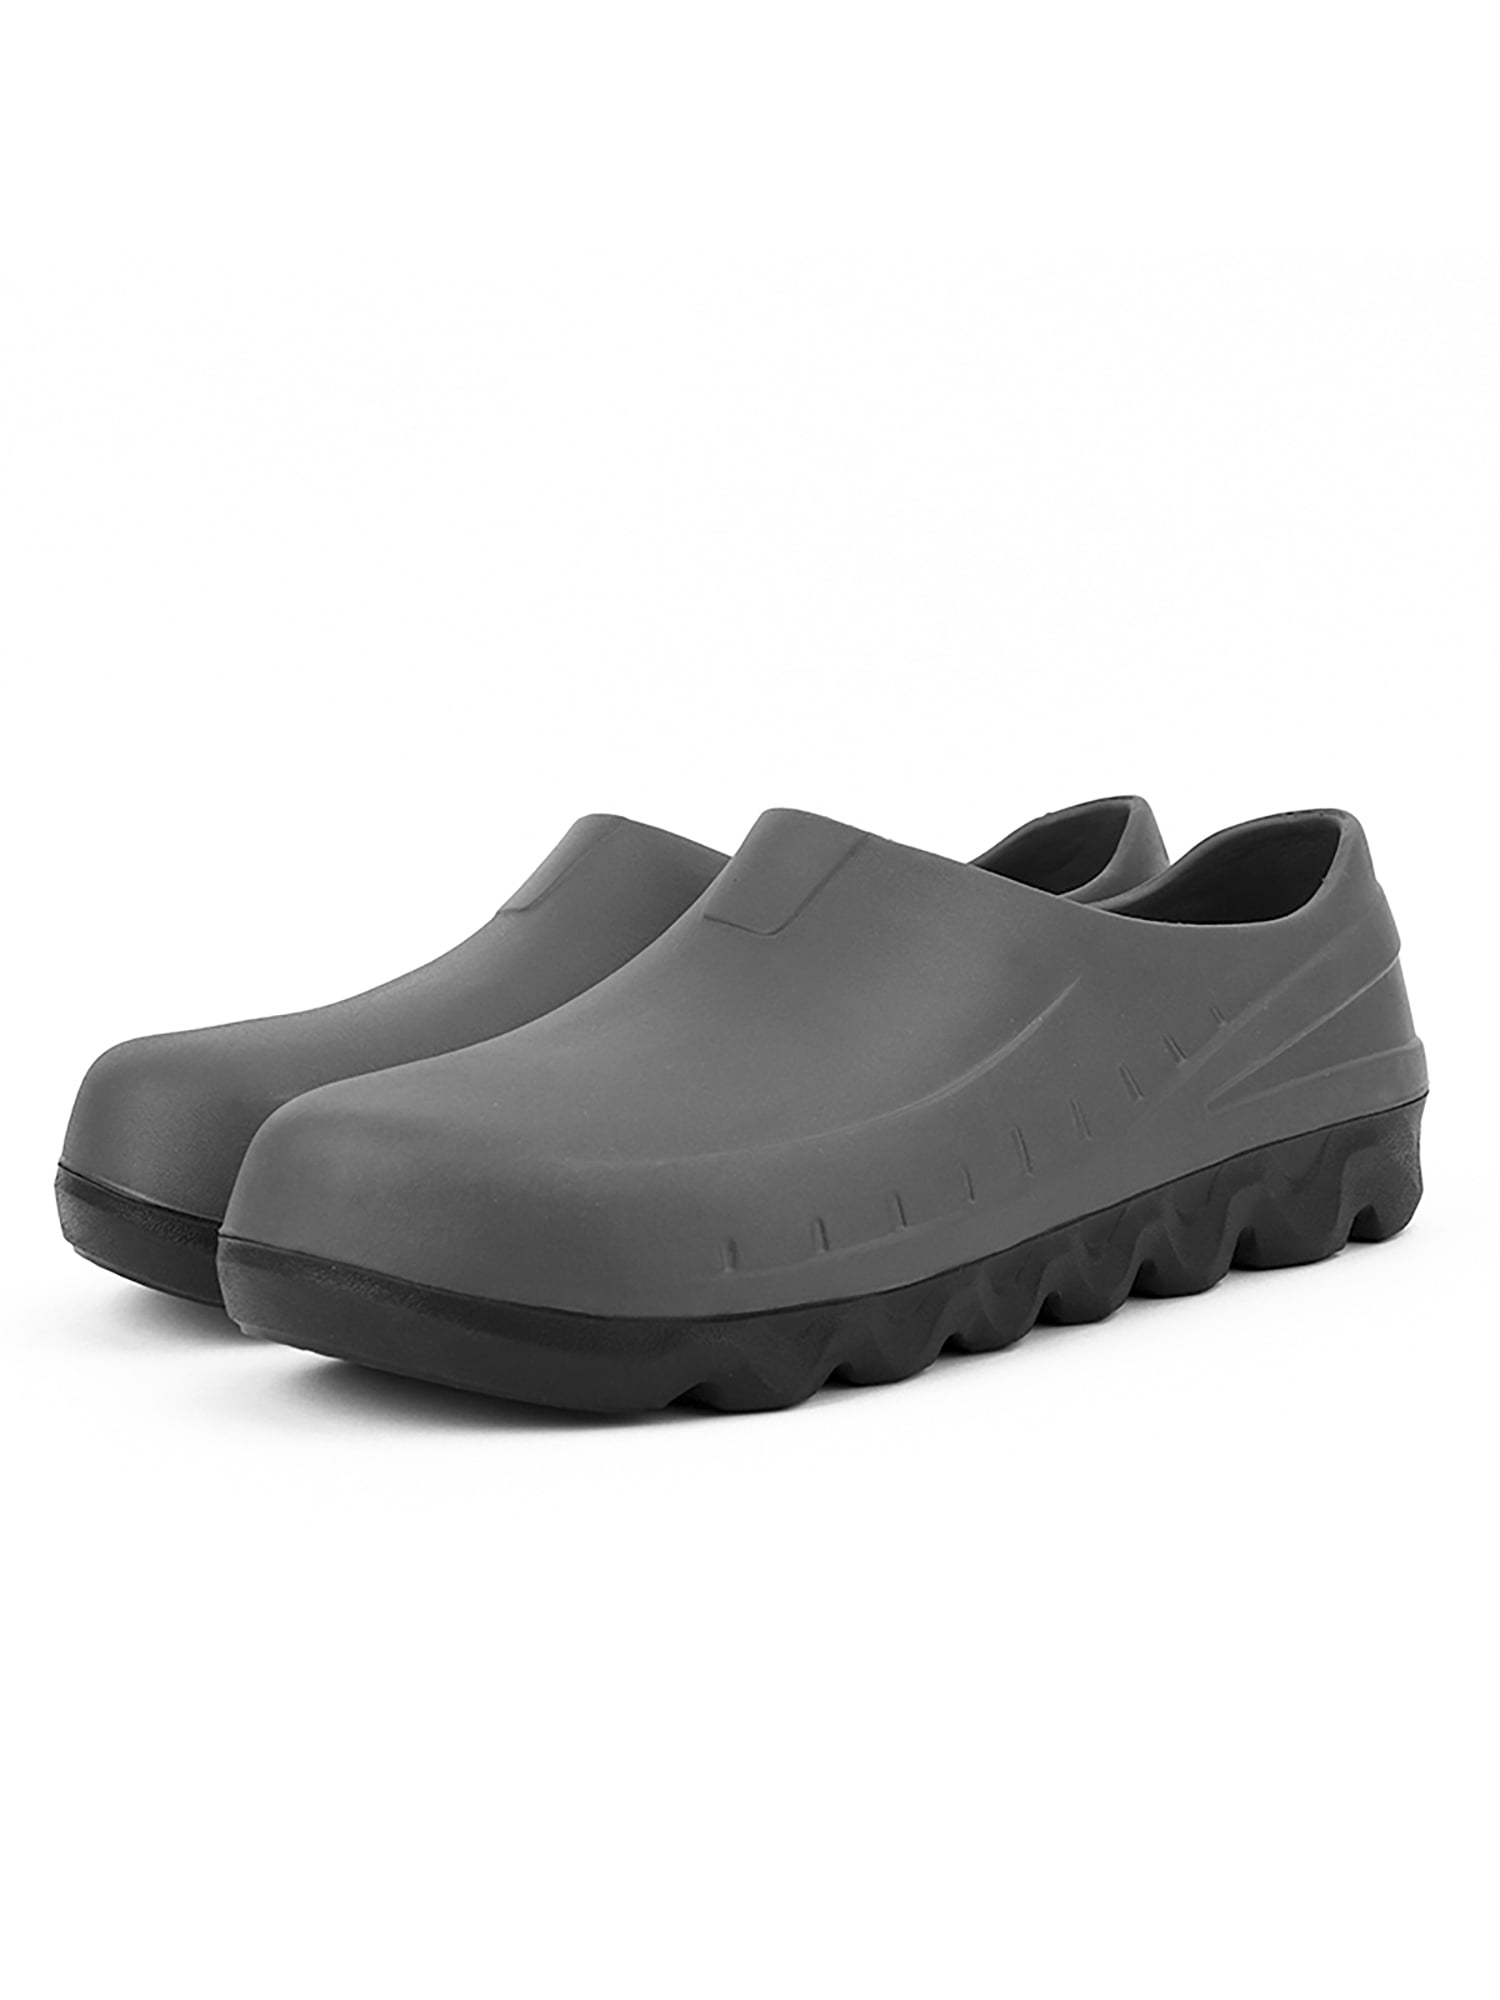 Men Chef Shoes Clog Kitchen Non-slip Shoes Safety shoes Oil Water even on safety 